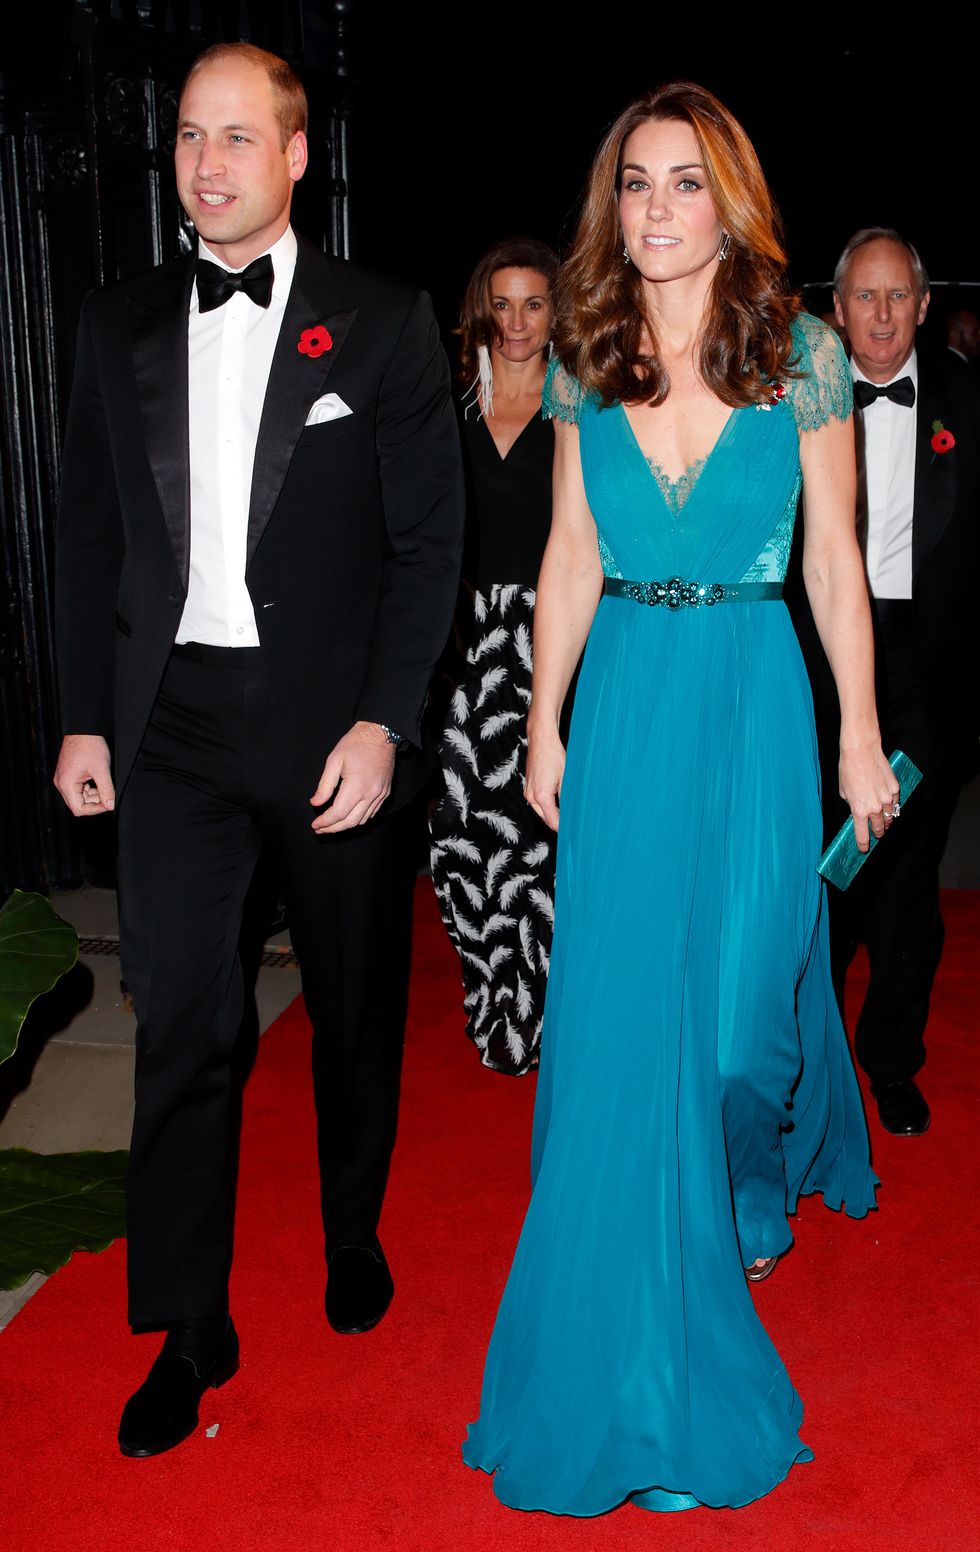 the duke and duchess of cambridge attend the tusk conservation awards